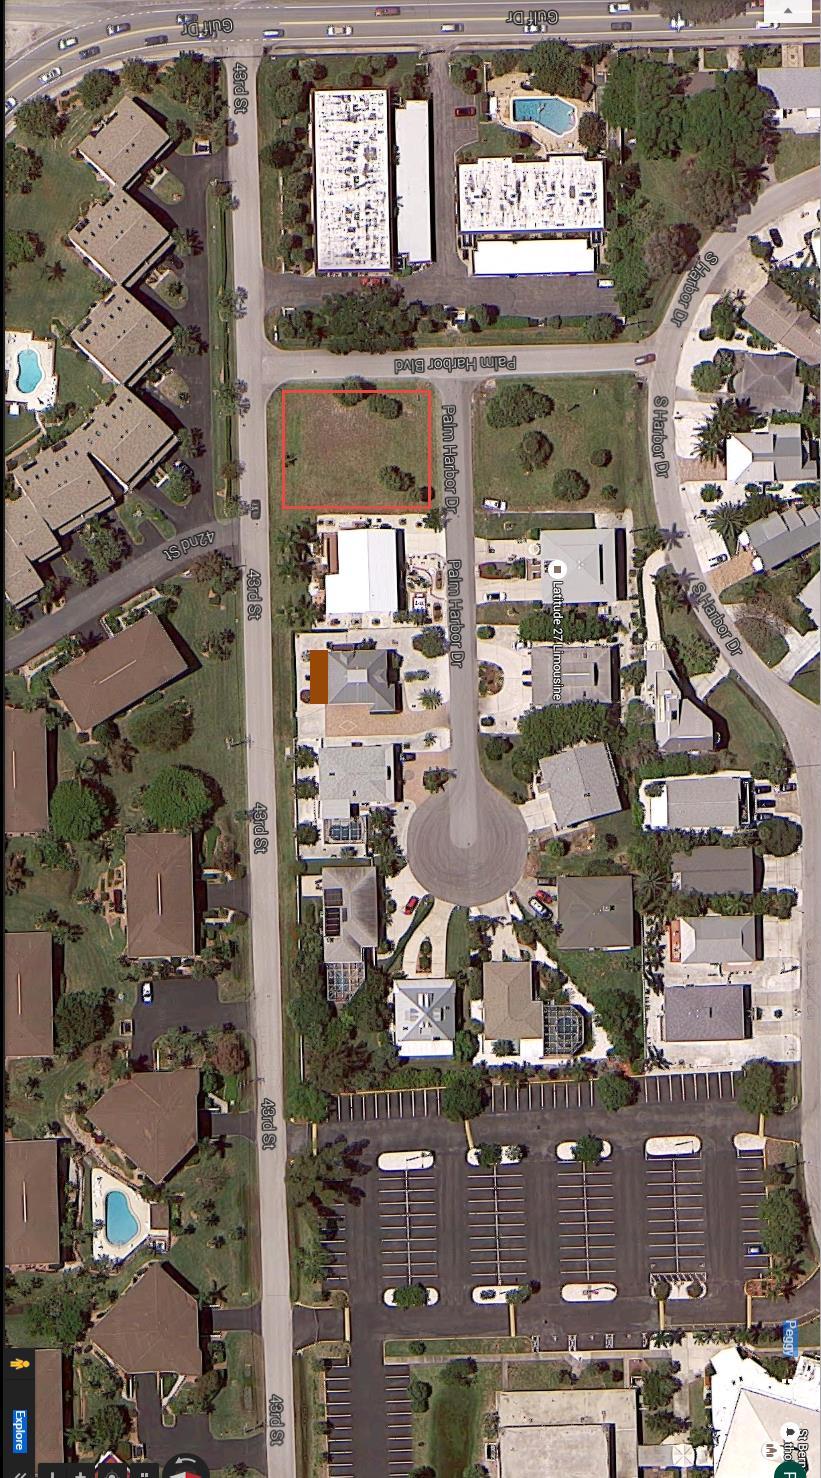 43 rd Street Gulf Drive One Palm Harbor Drive N Palm Harbor Blvd Palm Harbor Dr Catholic Church The Palm Harbor subdivision (outlined in blue) is made up of 12 parcels. The subdivision is zoned R-1.